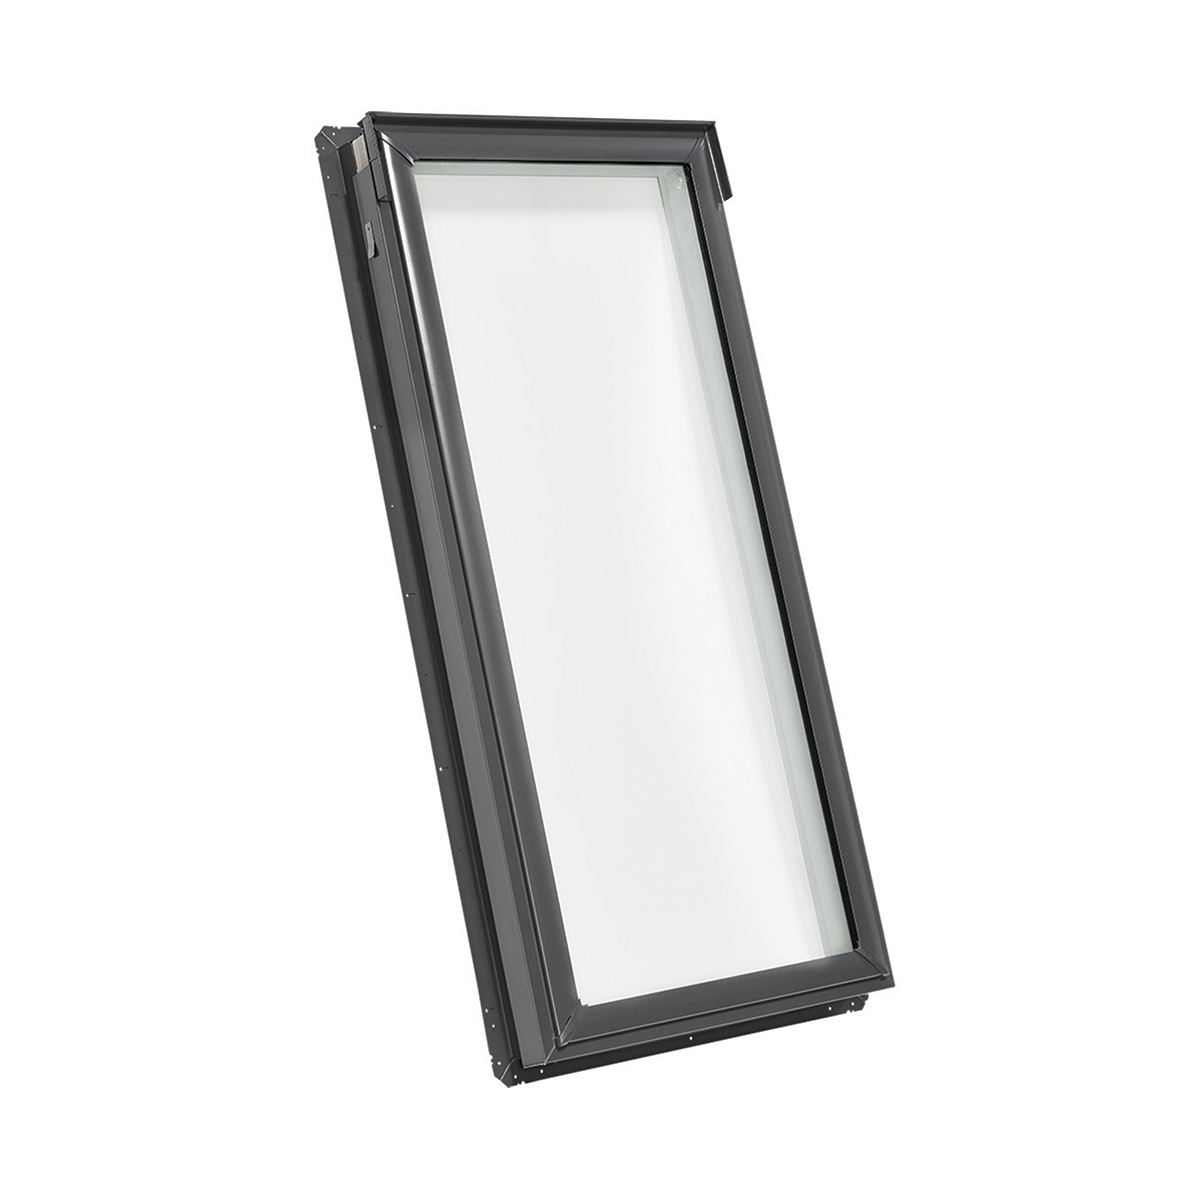 Fixed Deck-Mount Skylight with Laminated Low-E3 Glass - 14-1/2 in. x 45-3/4 in. - FS A06